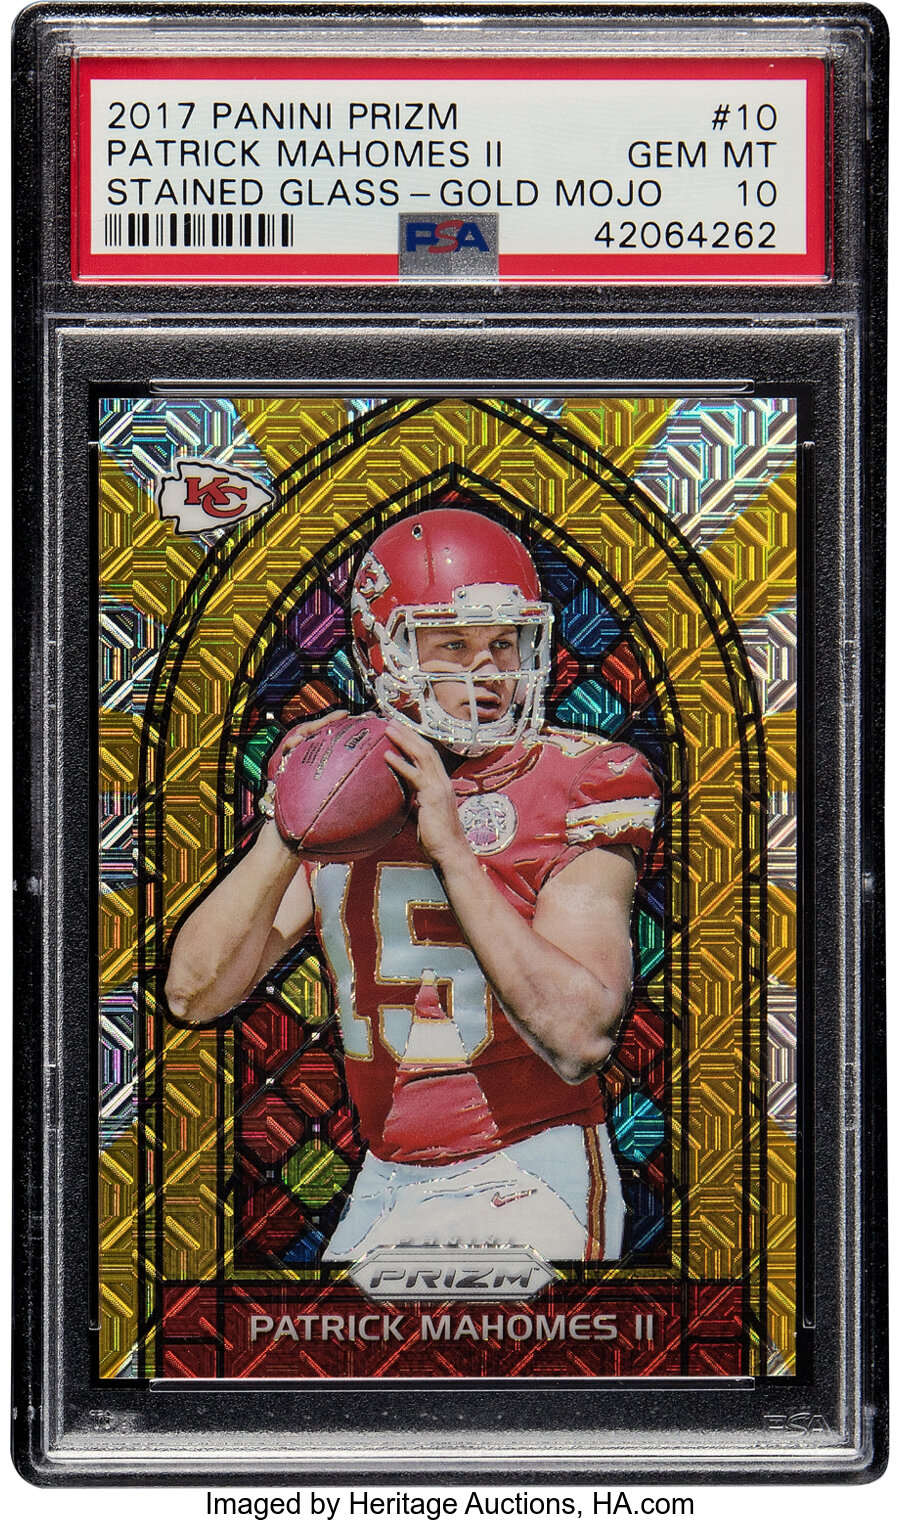 2017 Panini Prizm Patrick Mahomes II (Stained Glass-Gold Mojo) Rookie #10 PSA Gem Mint 10 - #'d 4/10 - Pop Two!